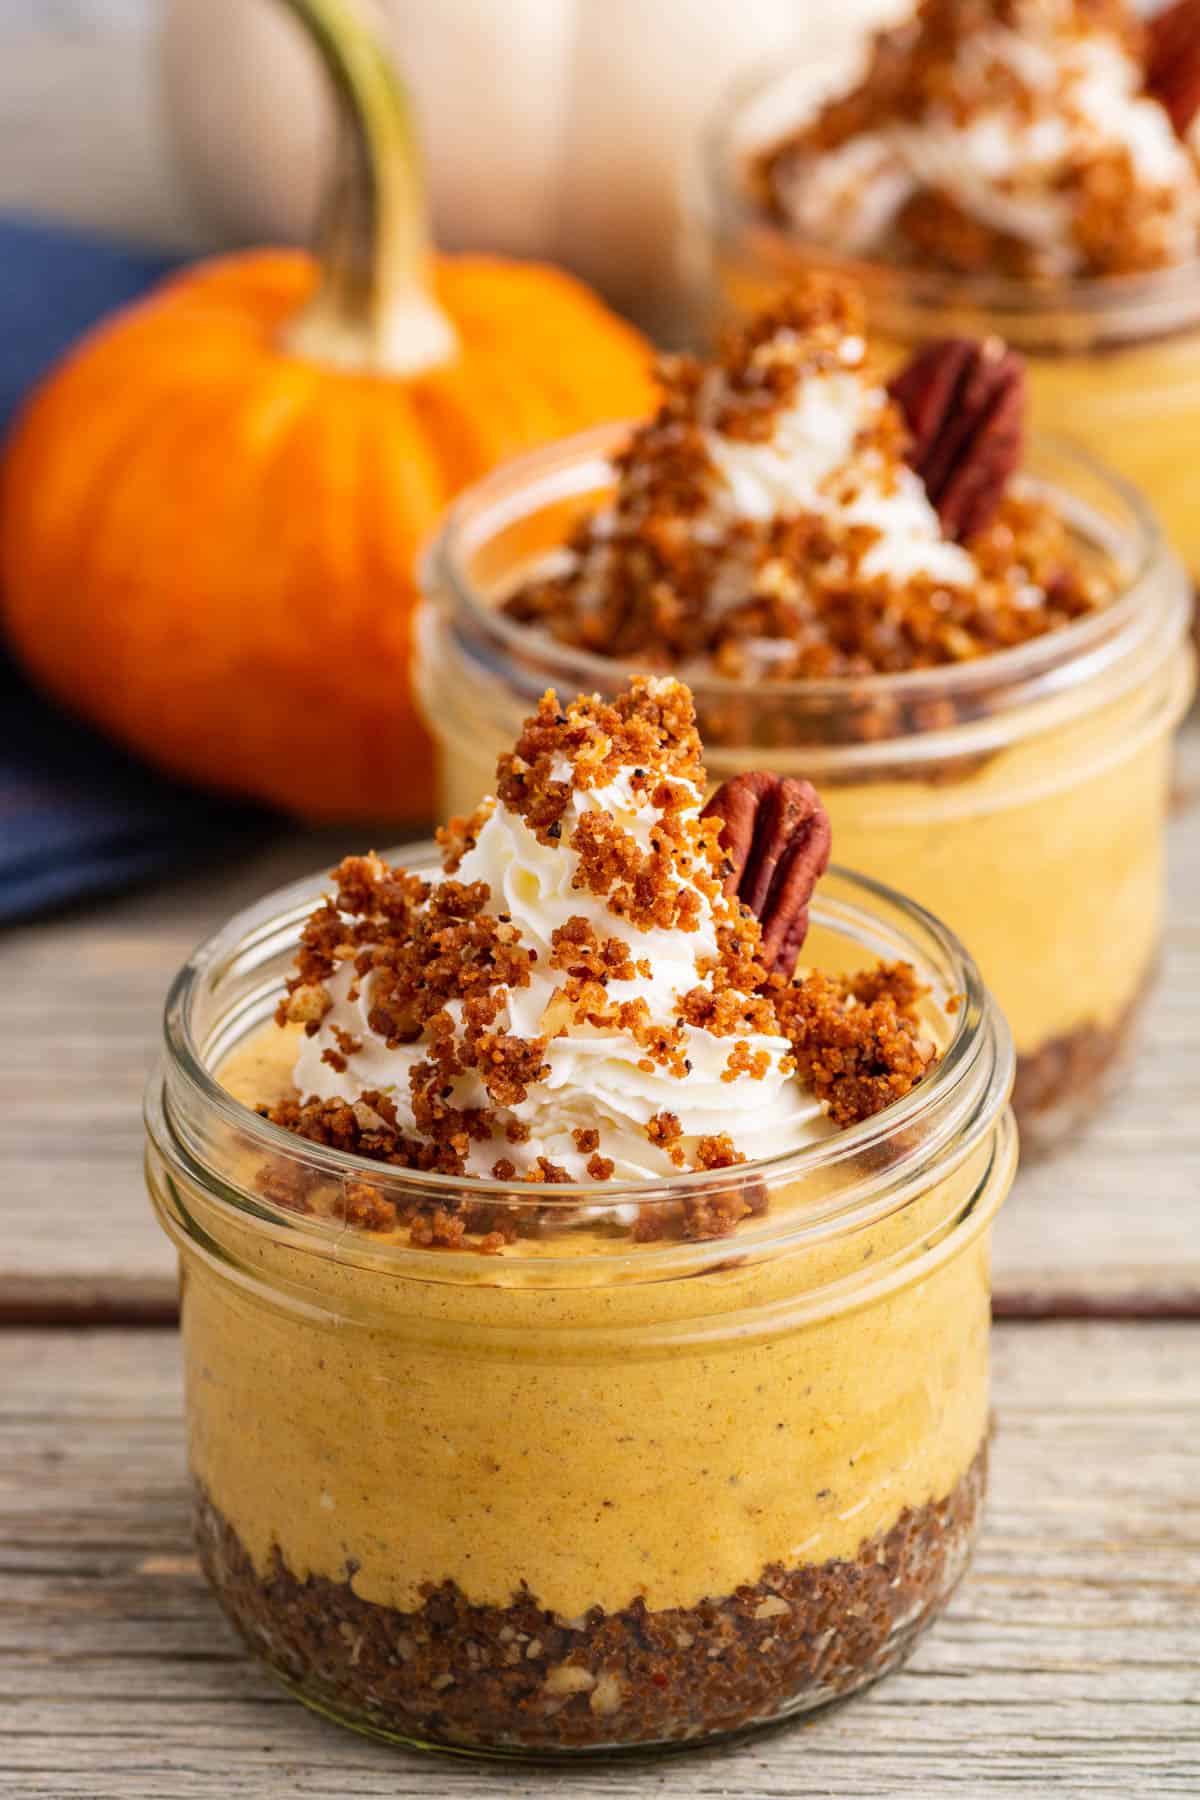 An orange pumpkin sits beside three individually sized Pumpkin Delight desserts topped with gingersnap crumbs and pecans. 